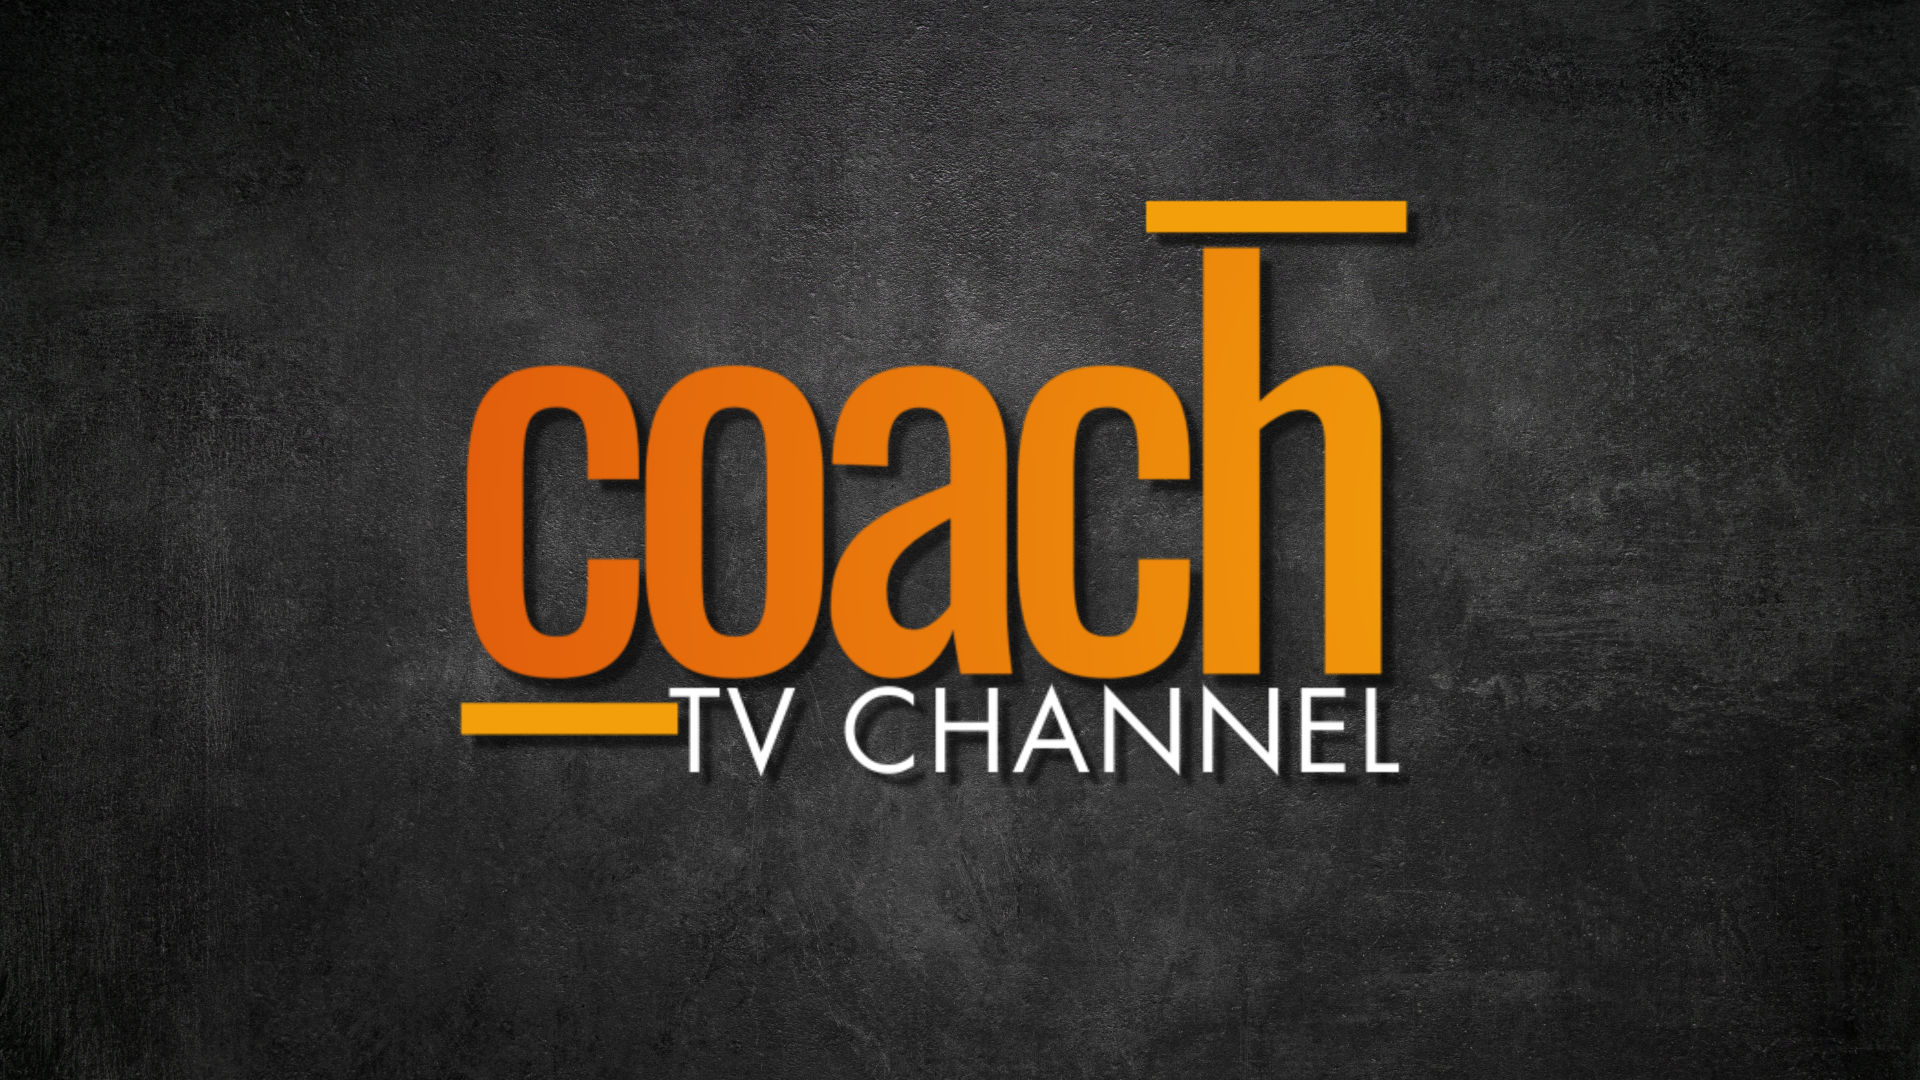 Coach TV Channel